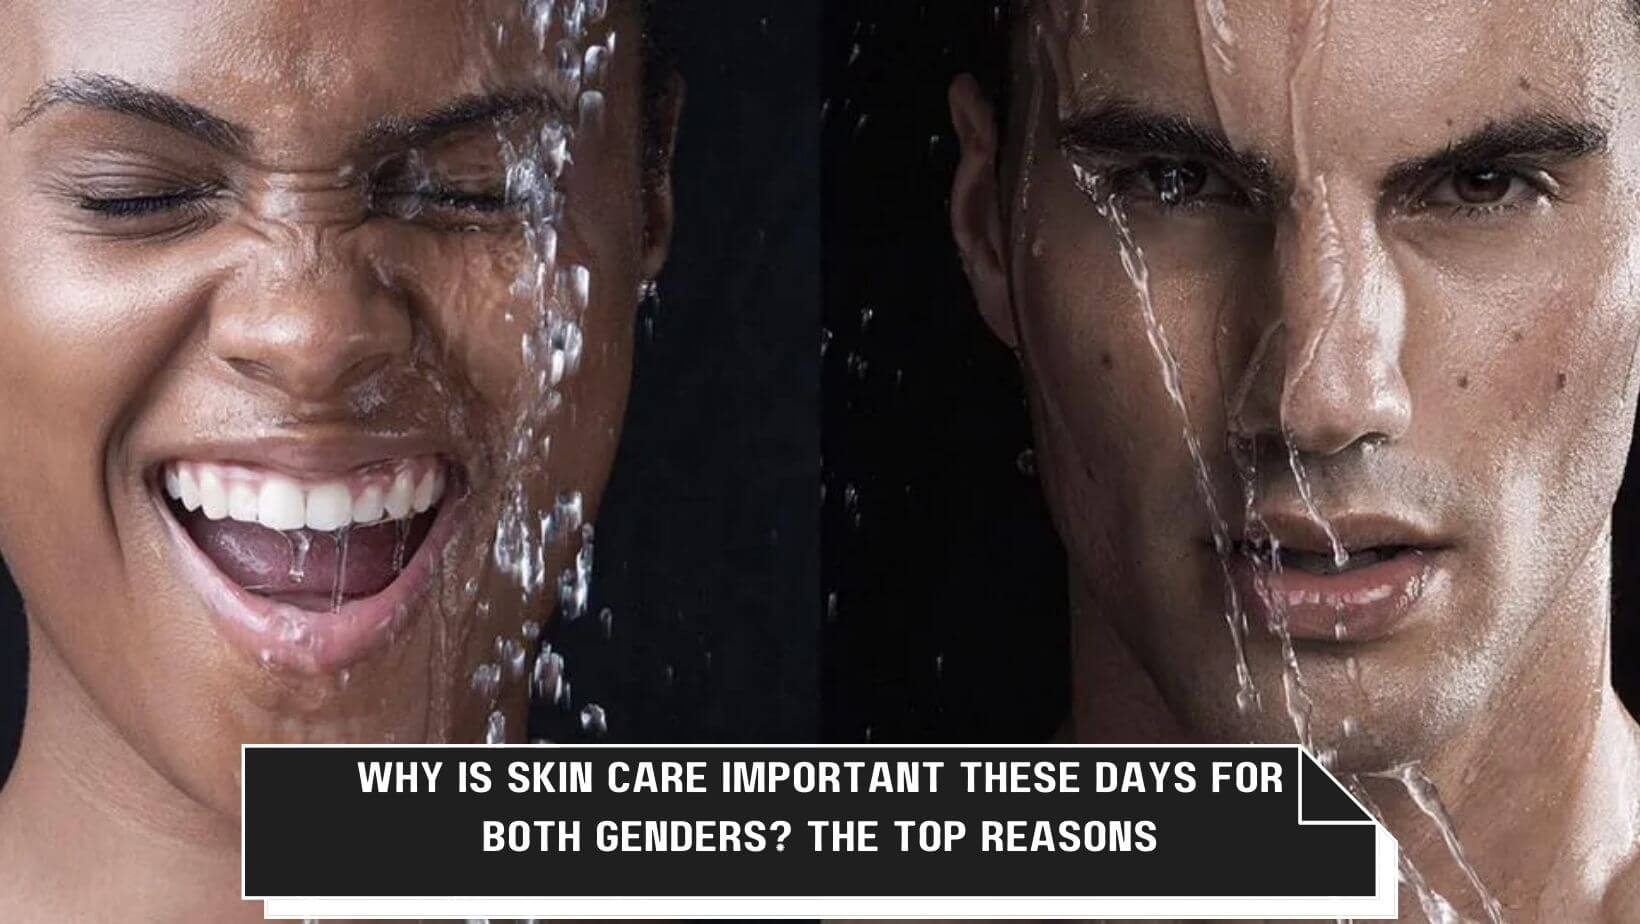 Why Is Skin Care Important These Days for Both Genders?